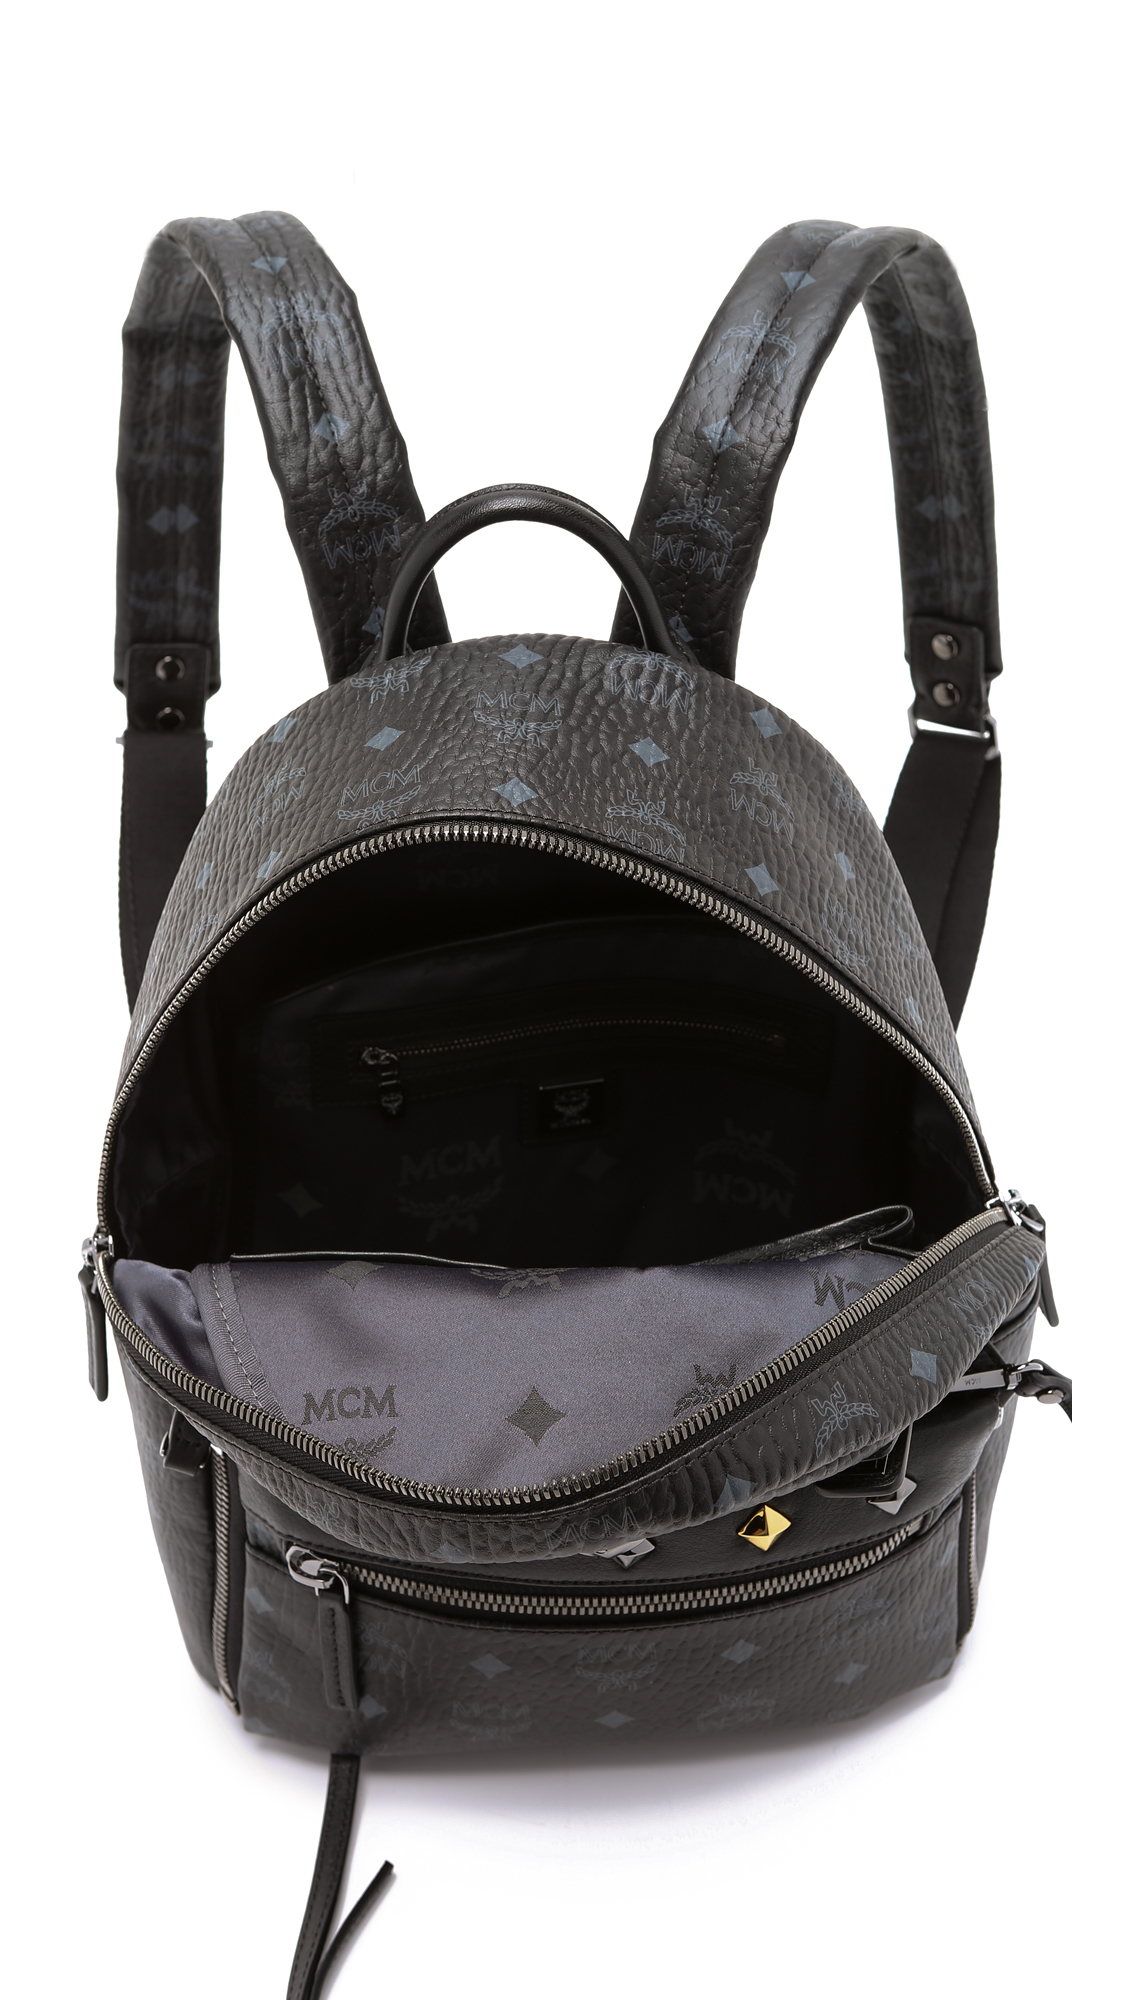 Lyst - Mcm Convertible Dual Small Stark Backpack - Black in Black